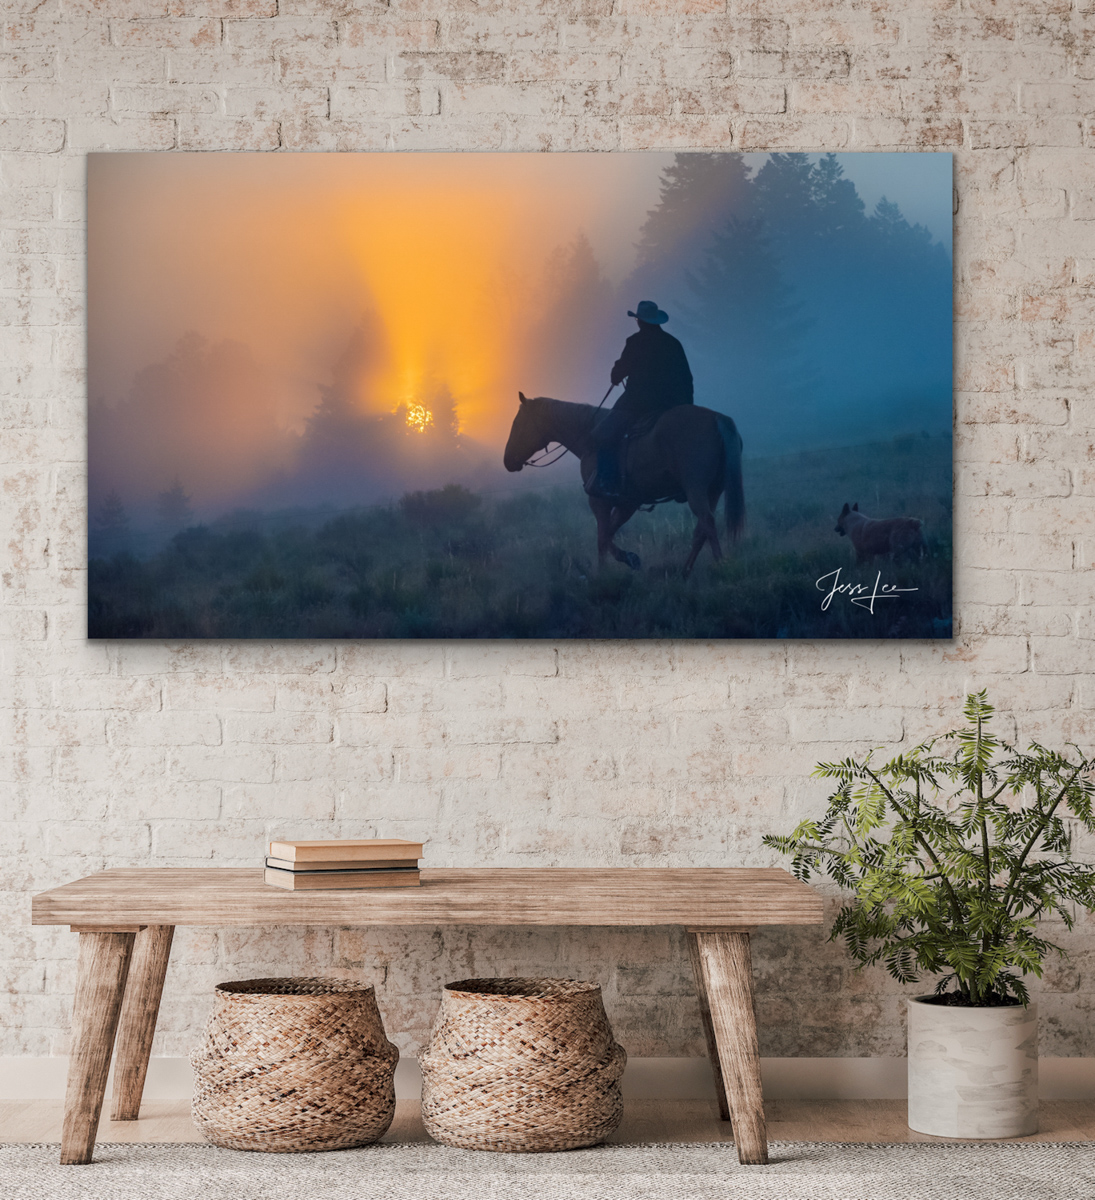 Cowboy Photography Prints. Pictures available as an Acrylic, Metal, Canvas, or Fine Art Paper limited edition wall art prints.